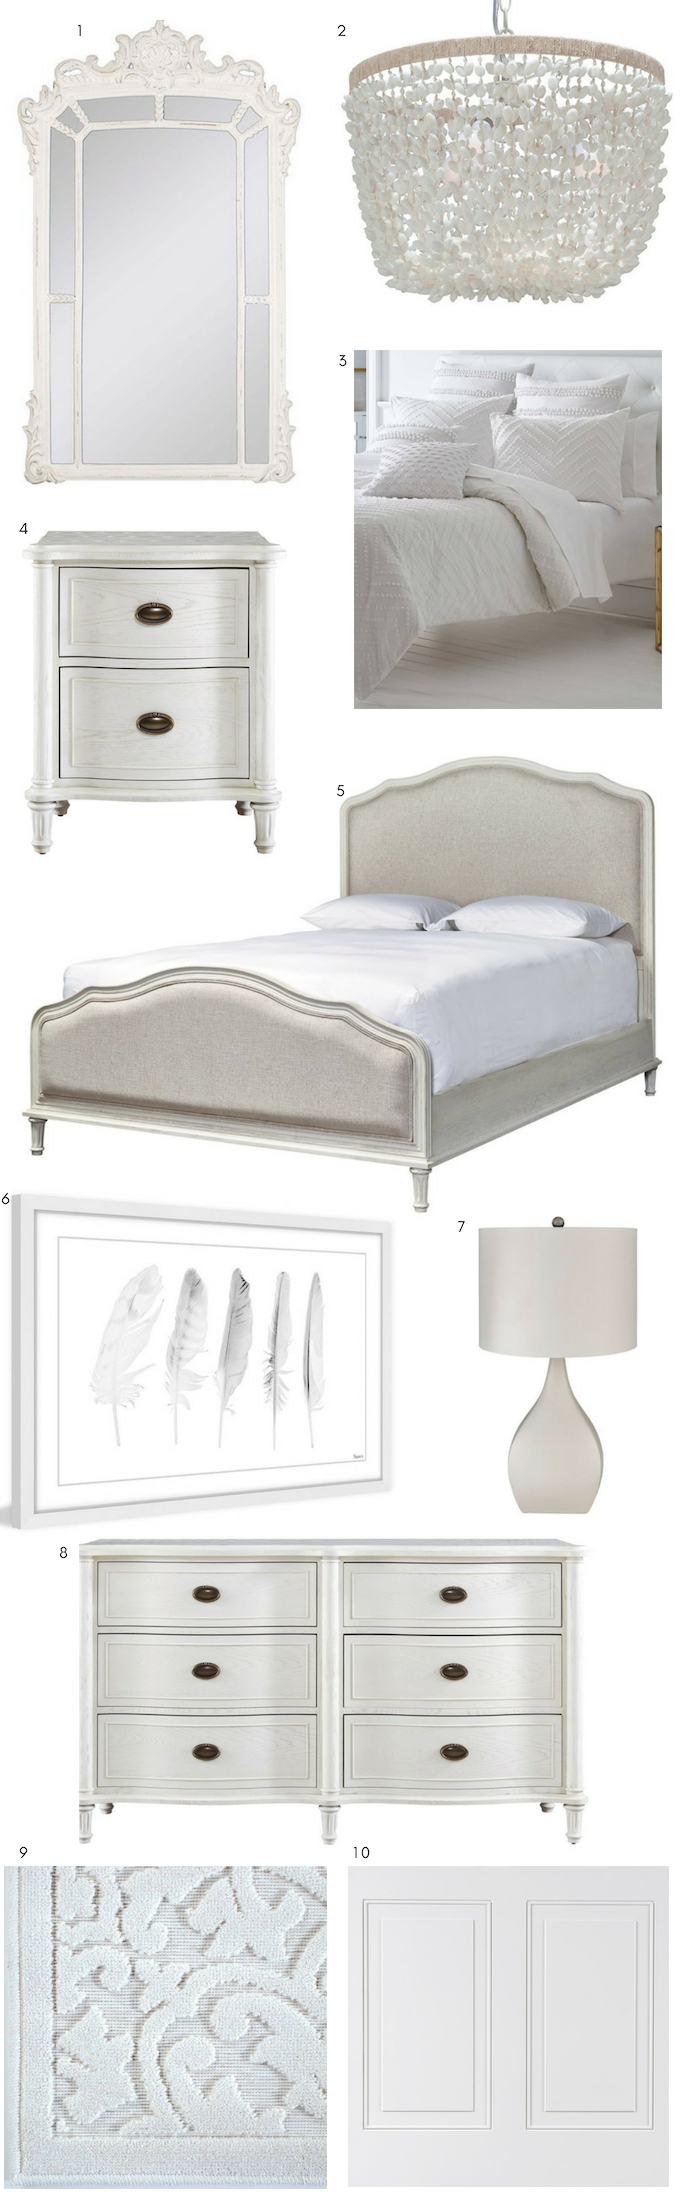 Pure white Master bedroom design board. Light bright master bedroom ideas. White bedroom. Master bedroom design board including: ｜1. Whitewash wall mirror｜2. Shell chandelier ｜3. Trina Turk bedding ｜4. Universal Furniture Amity 2-drawer nightstand ｜5. Universal Furniture Amity bed ｜6. ‘Five white feathers’ art ｜7. White lamp ｜8. Universal Furniture Amity 6-drawer dresser ｜9. Orian Rugs Biscay Natural Area Rug ｜10. Wainscoting ｜